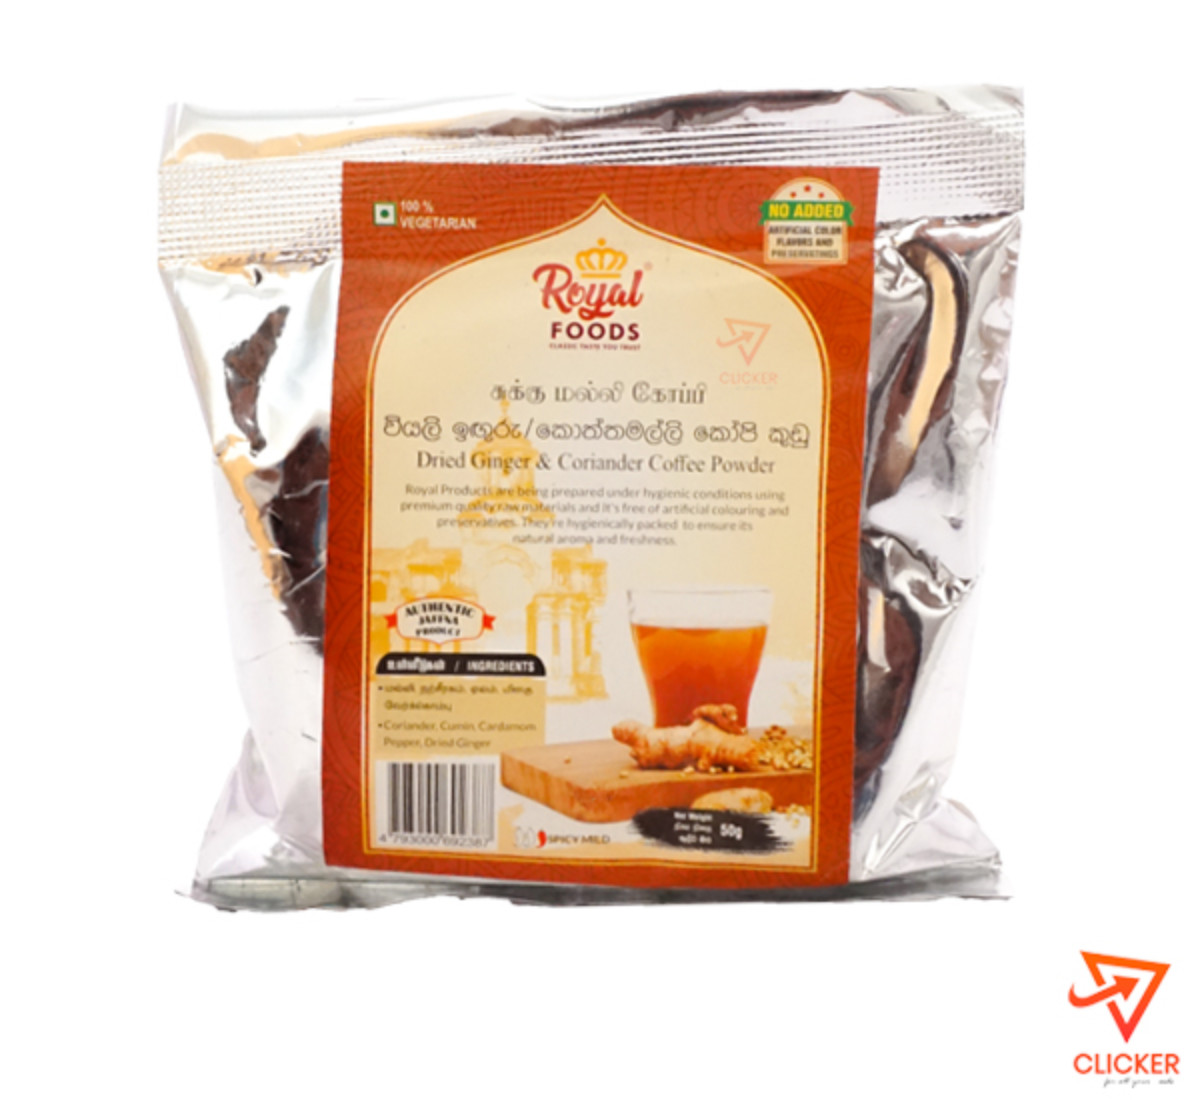 Clicker product 50g ROYALFOODS  dried ginger& coriander coffee powder 989